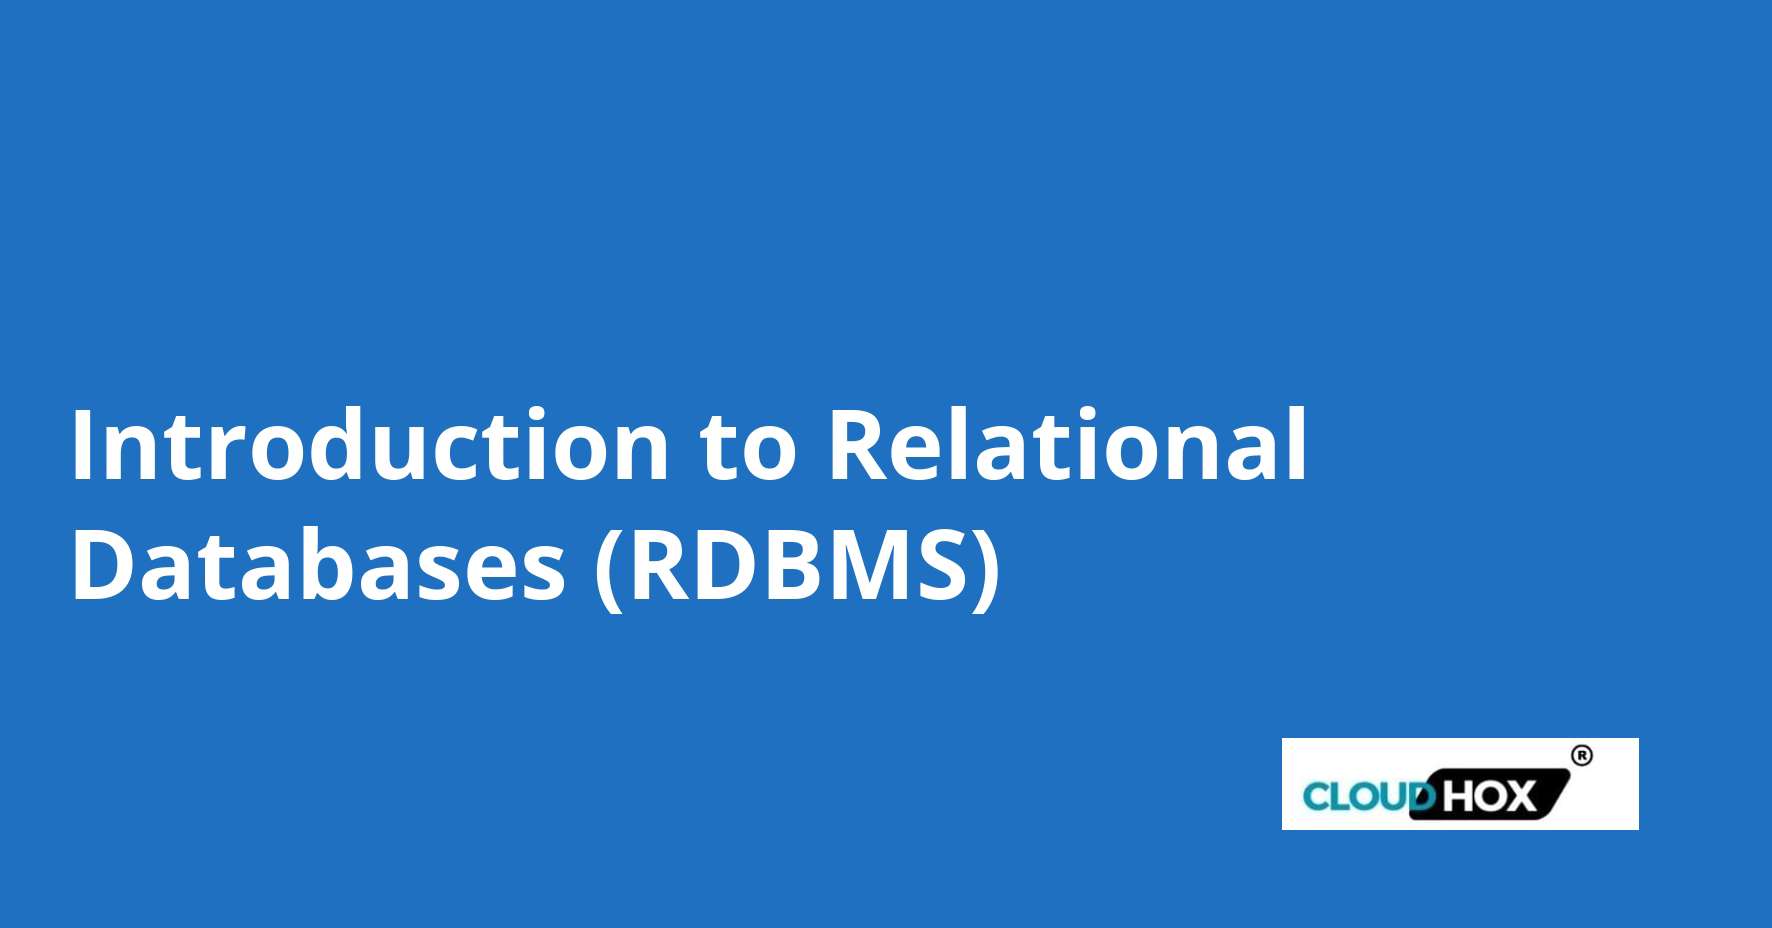 Introduction to Relational Databases (RDBMS)